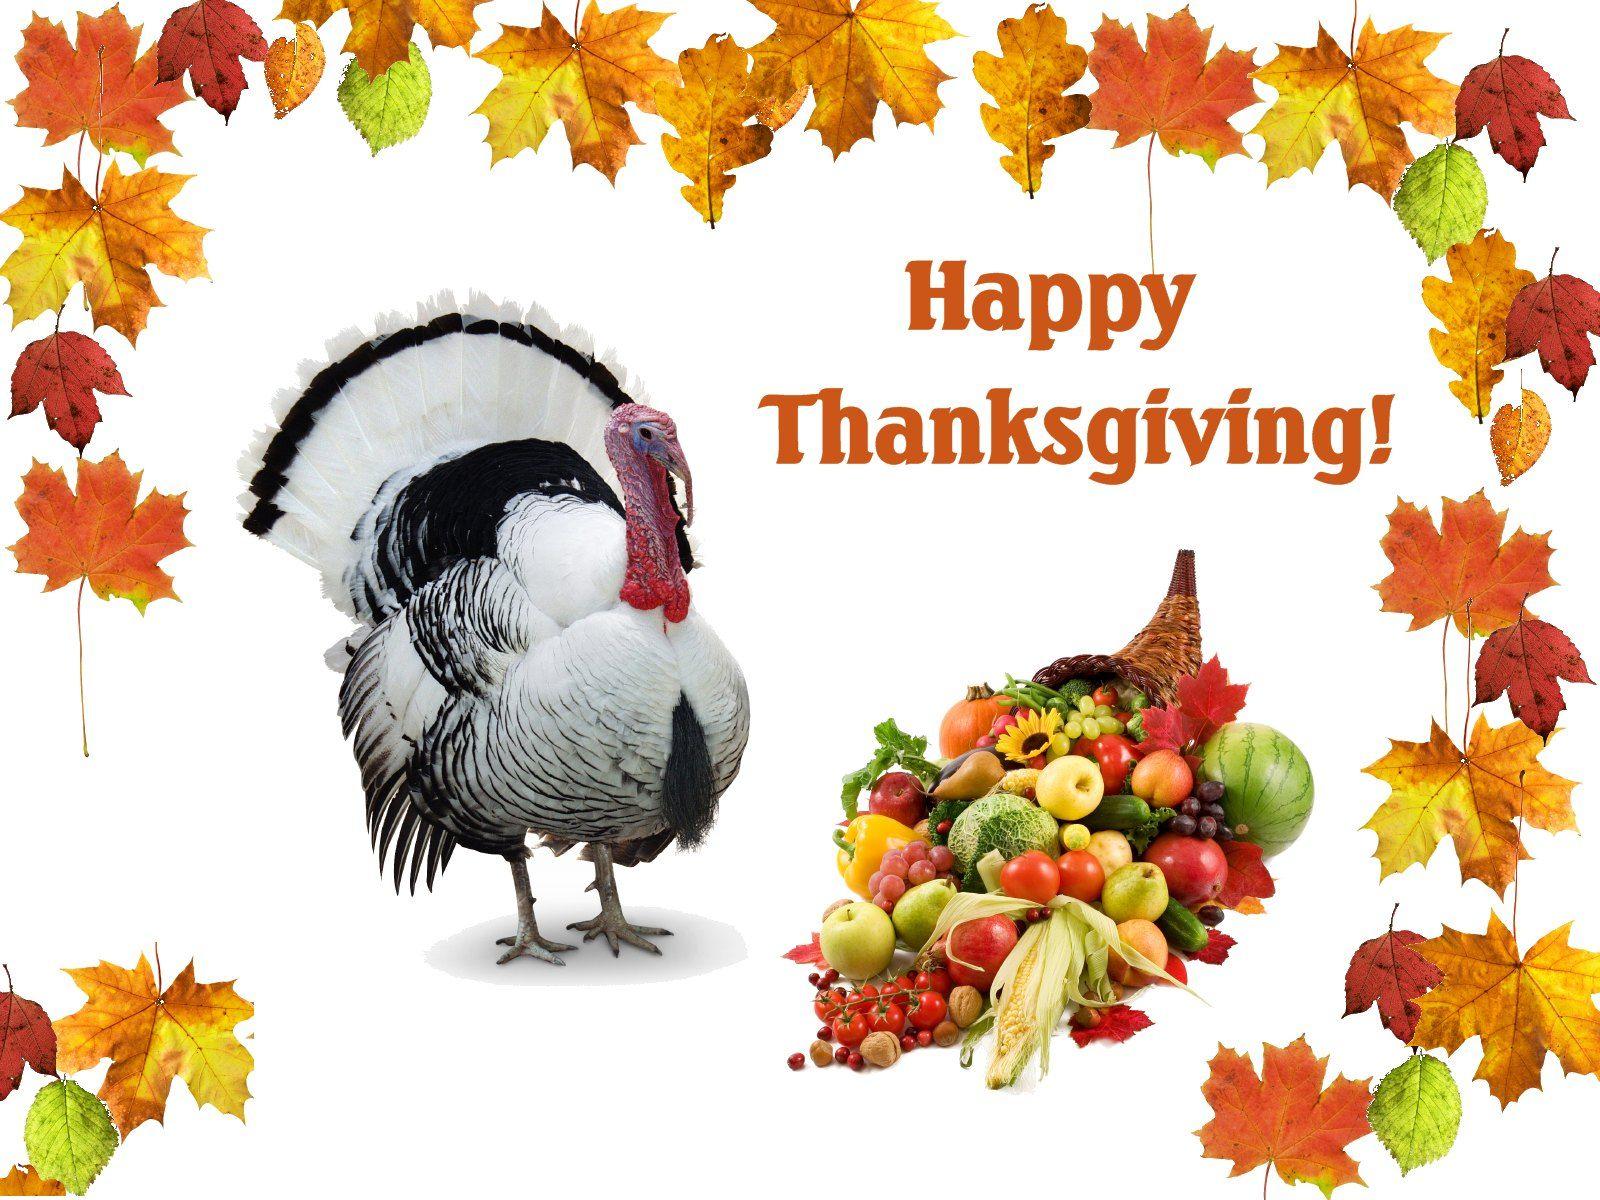 25+} Thanksgiving Day Image and Picture. Happy Thanksgiving Day